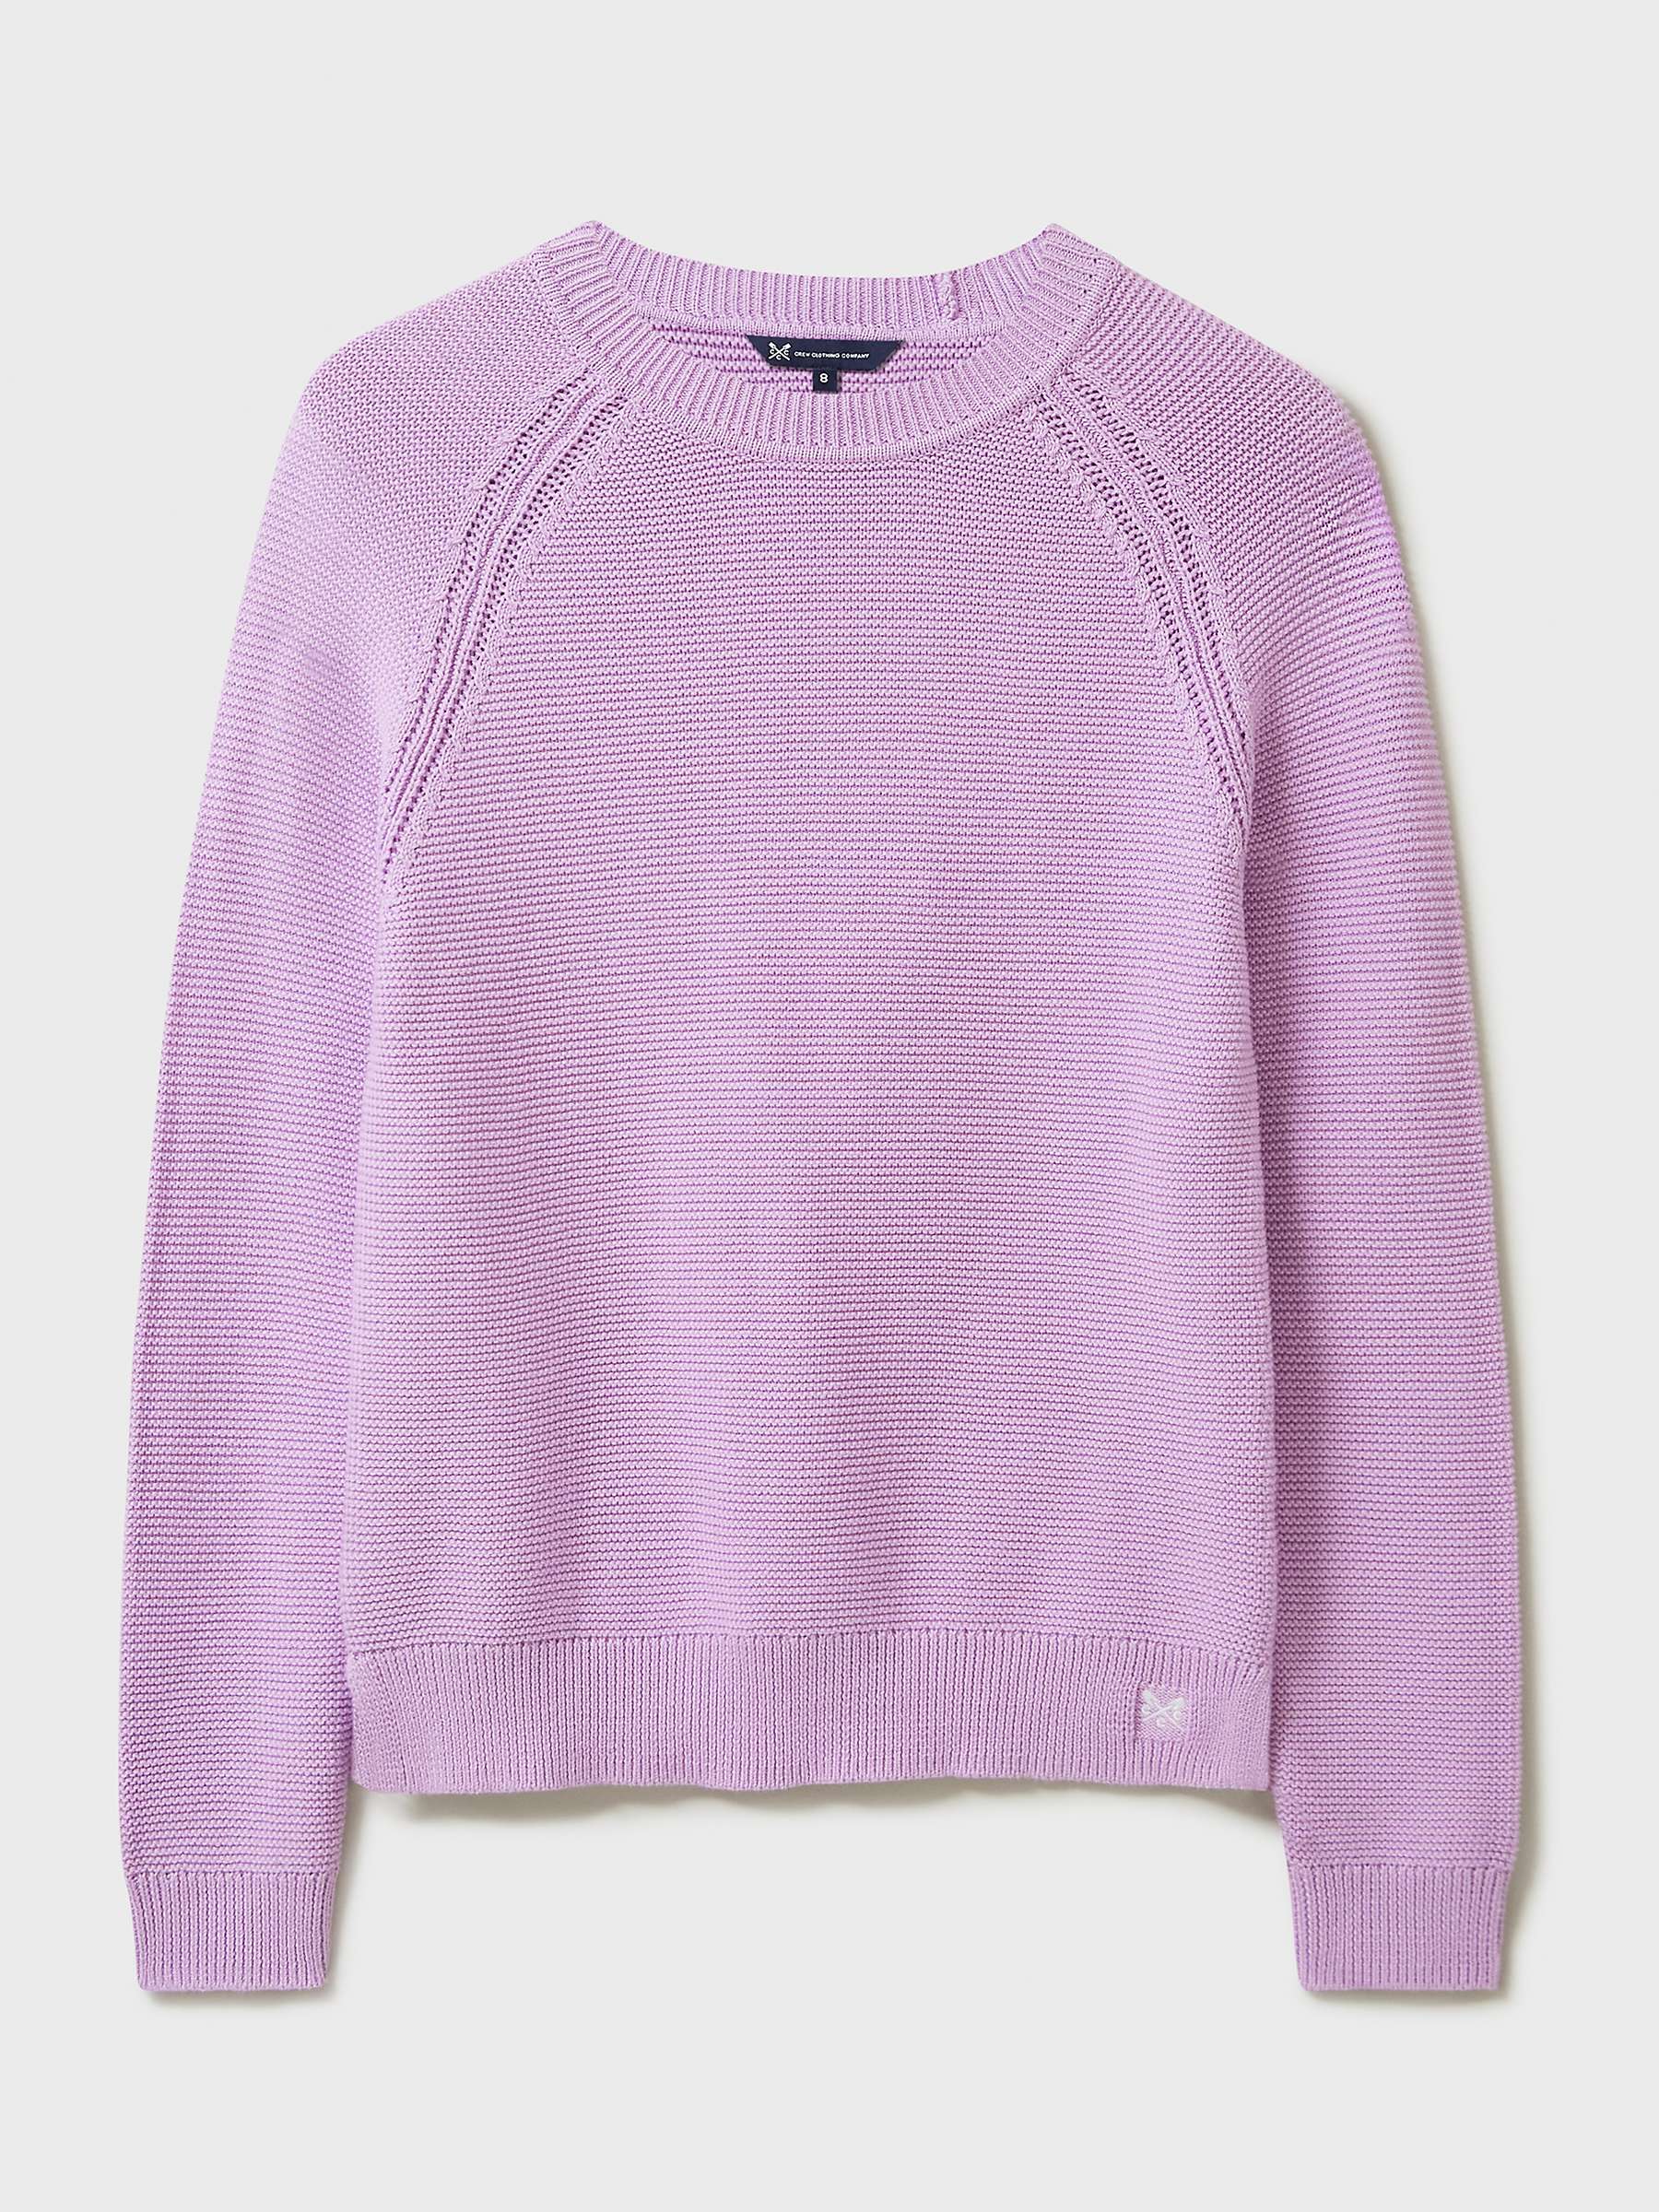 Buy Crew Clothing Cotton Textured Stitch Crew Neck Jumper, Lilac Online at johnlewis.com